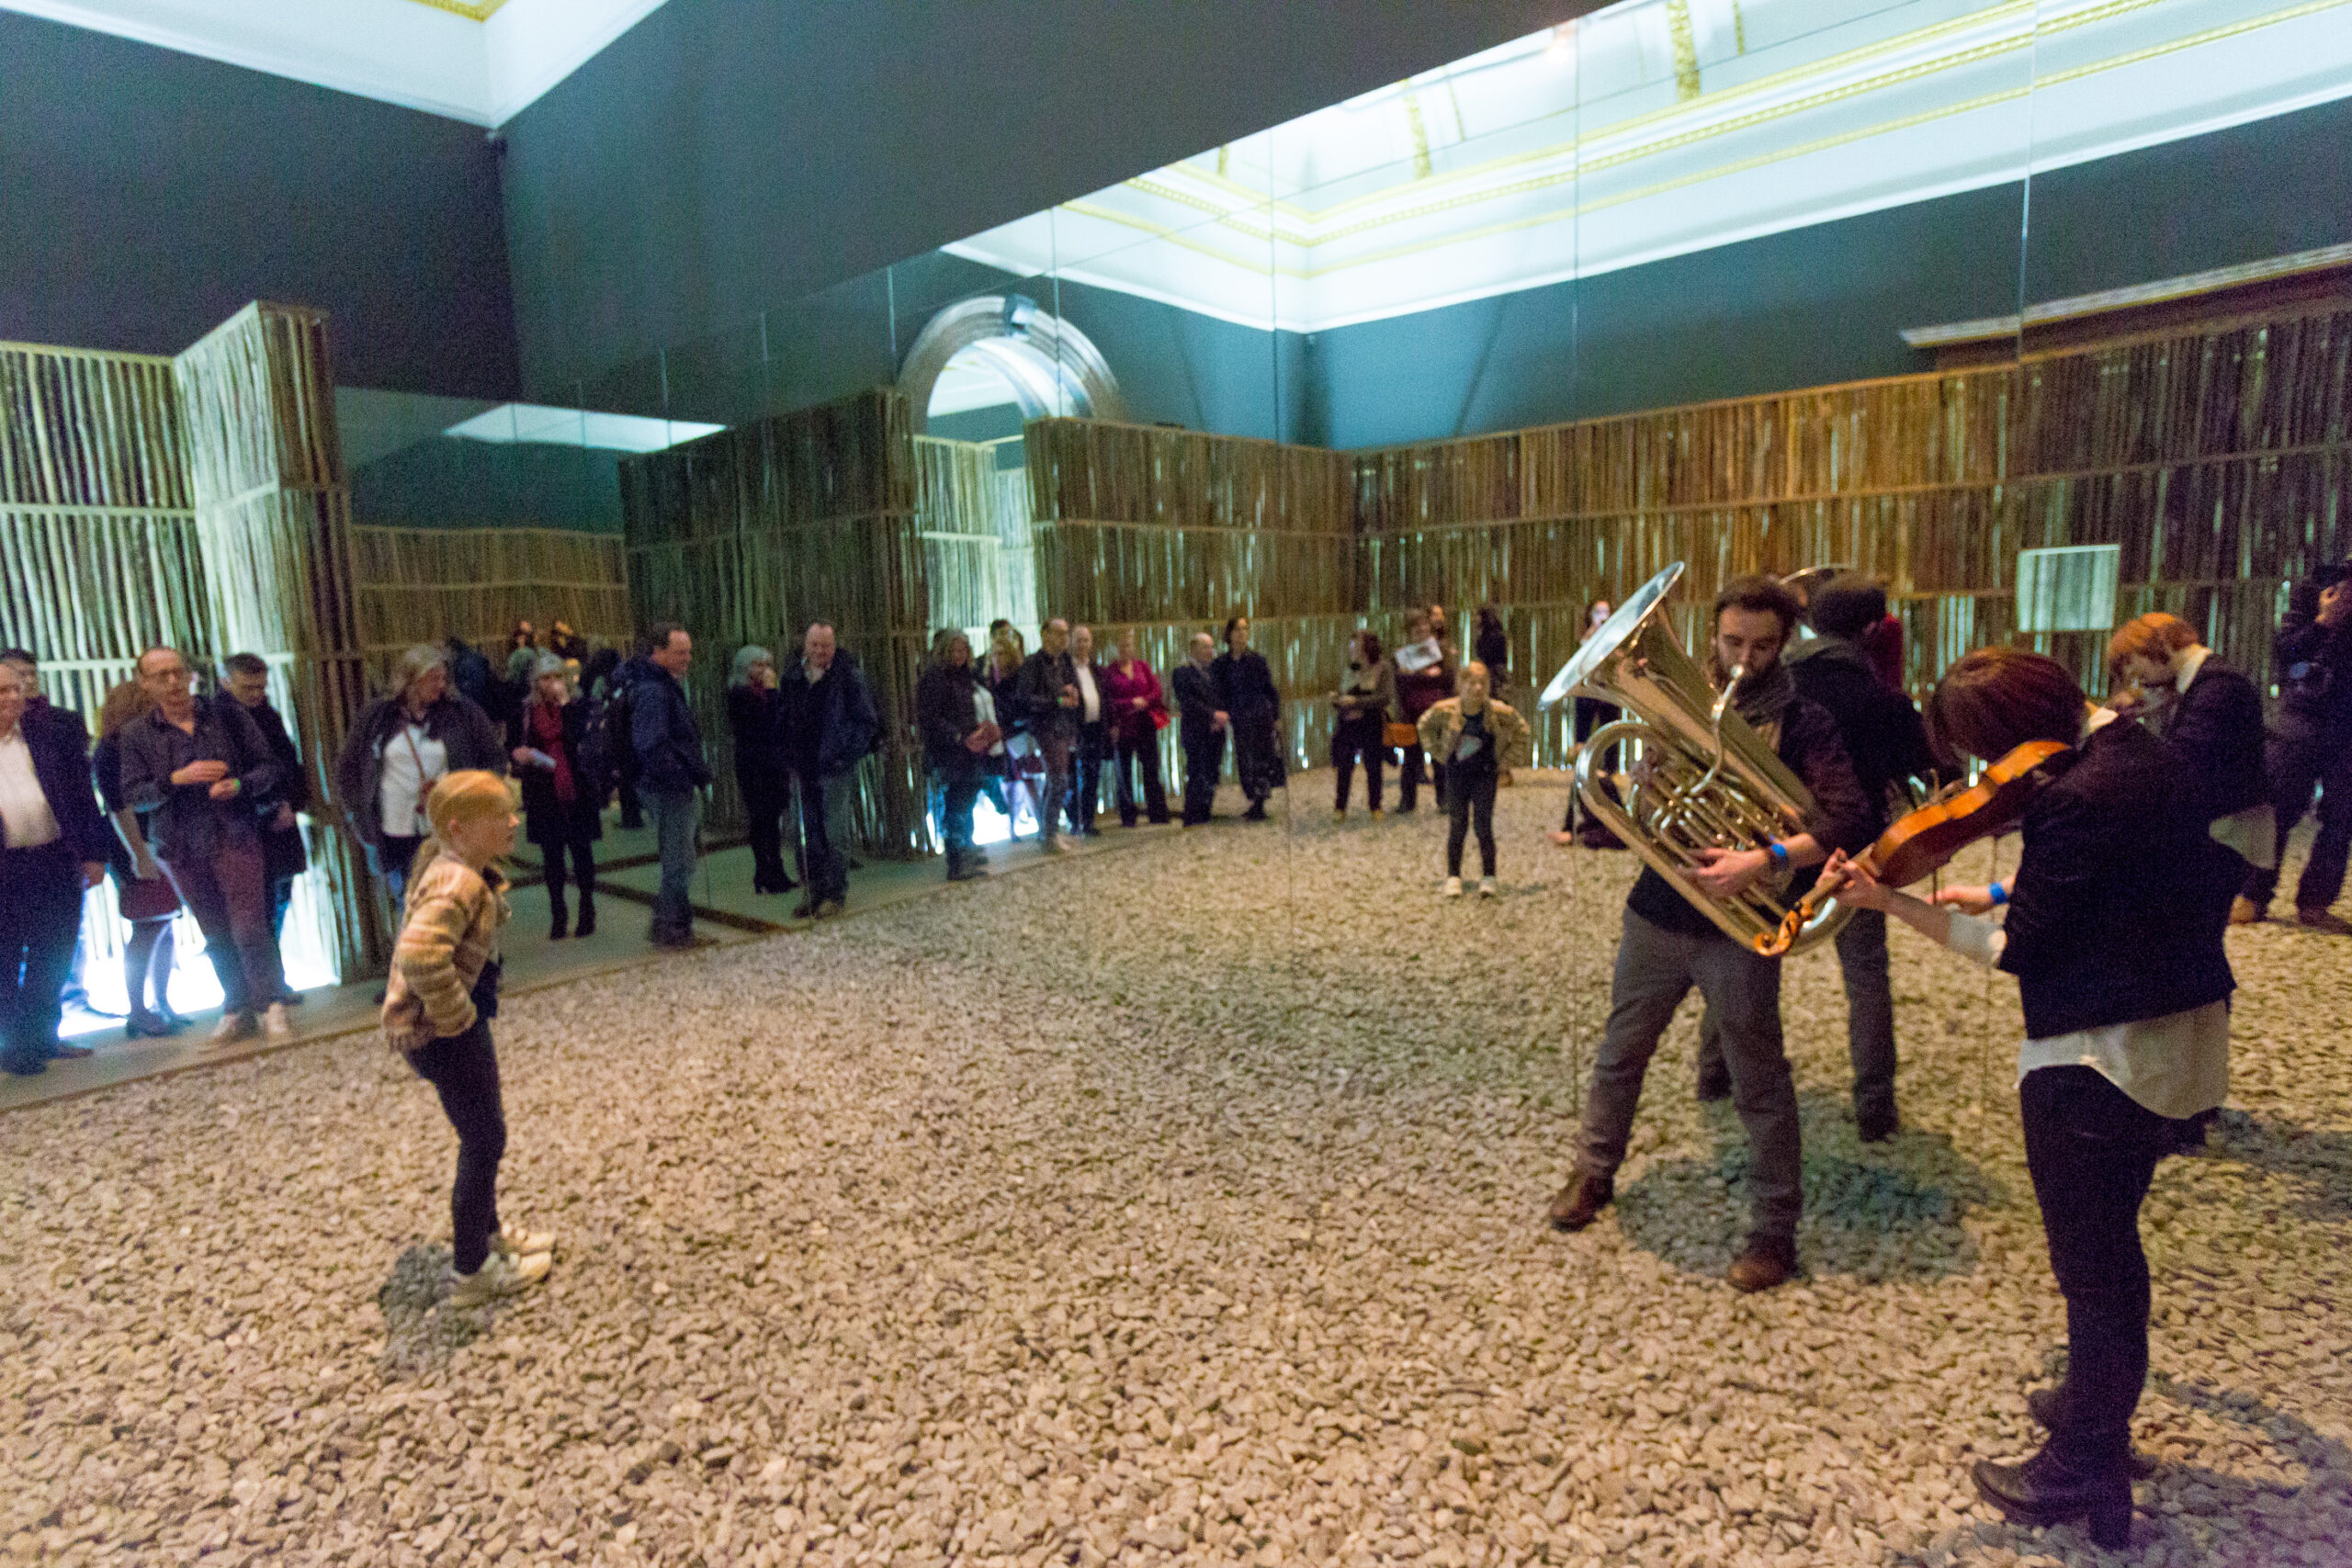 Roving musicians playing in Li Xiaodong’s installation at the ‘Friday Night Late’ for the Sensing Spaces: Architecture Reimagined exhibition, February 2014.  Credit: Tom Pande / Royal Academy of Arts